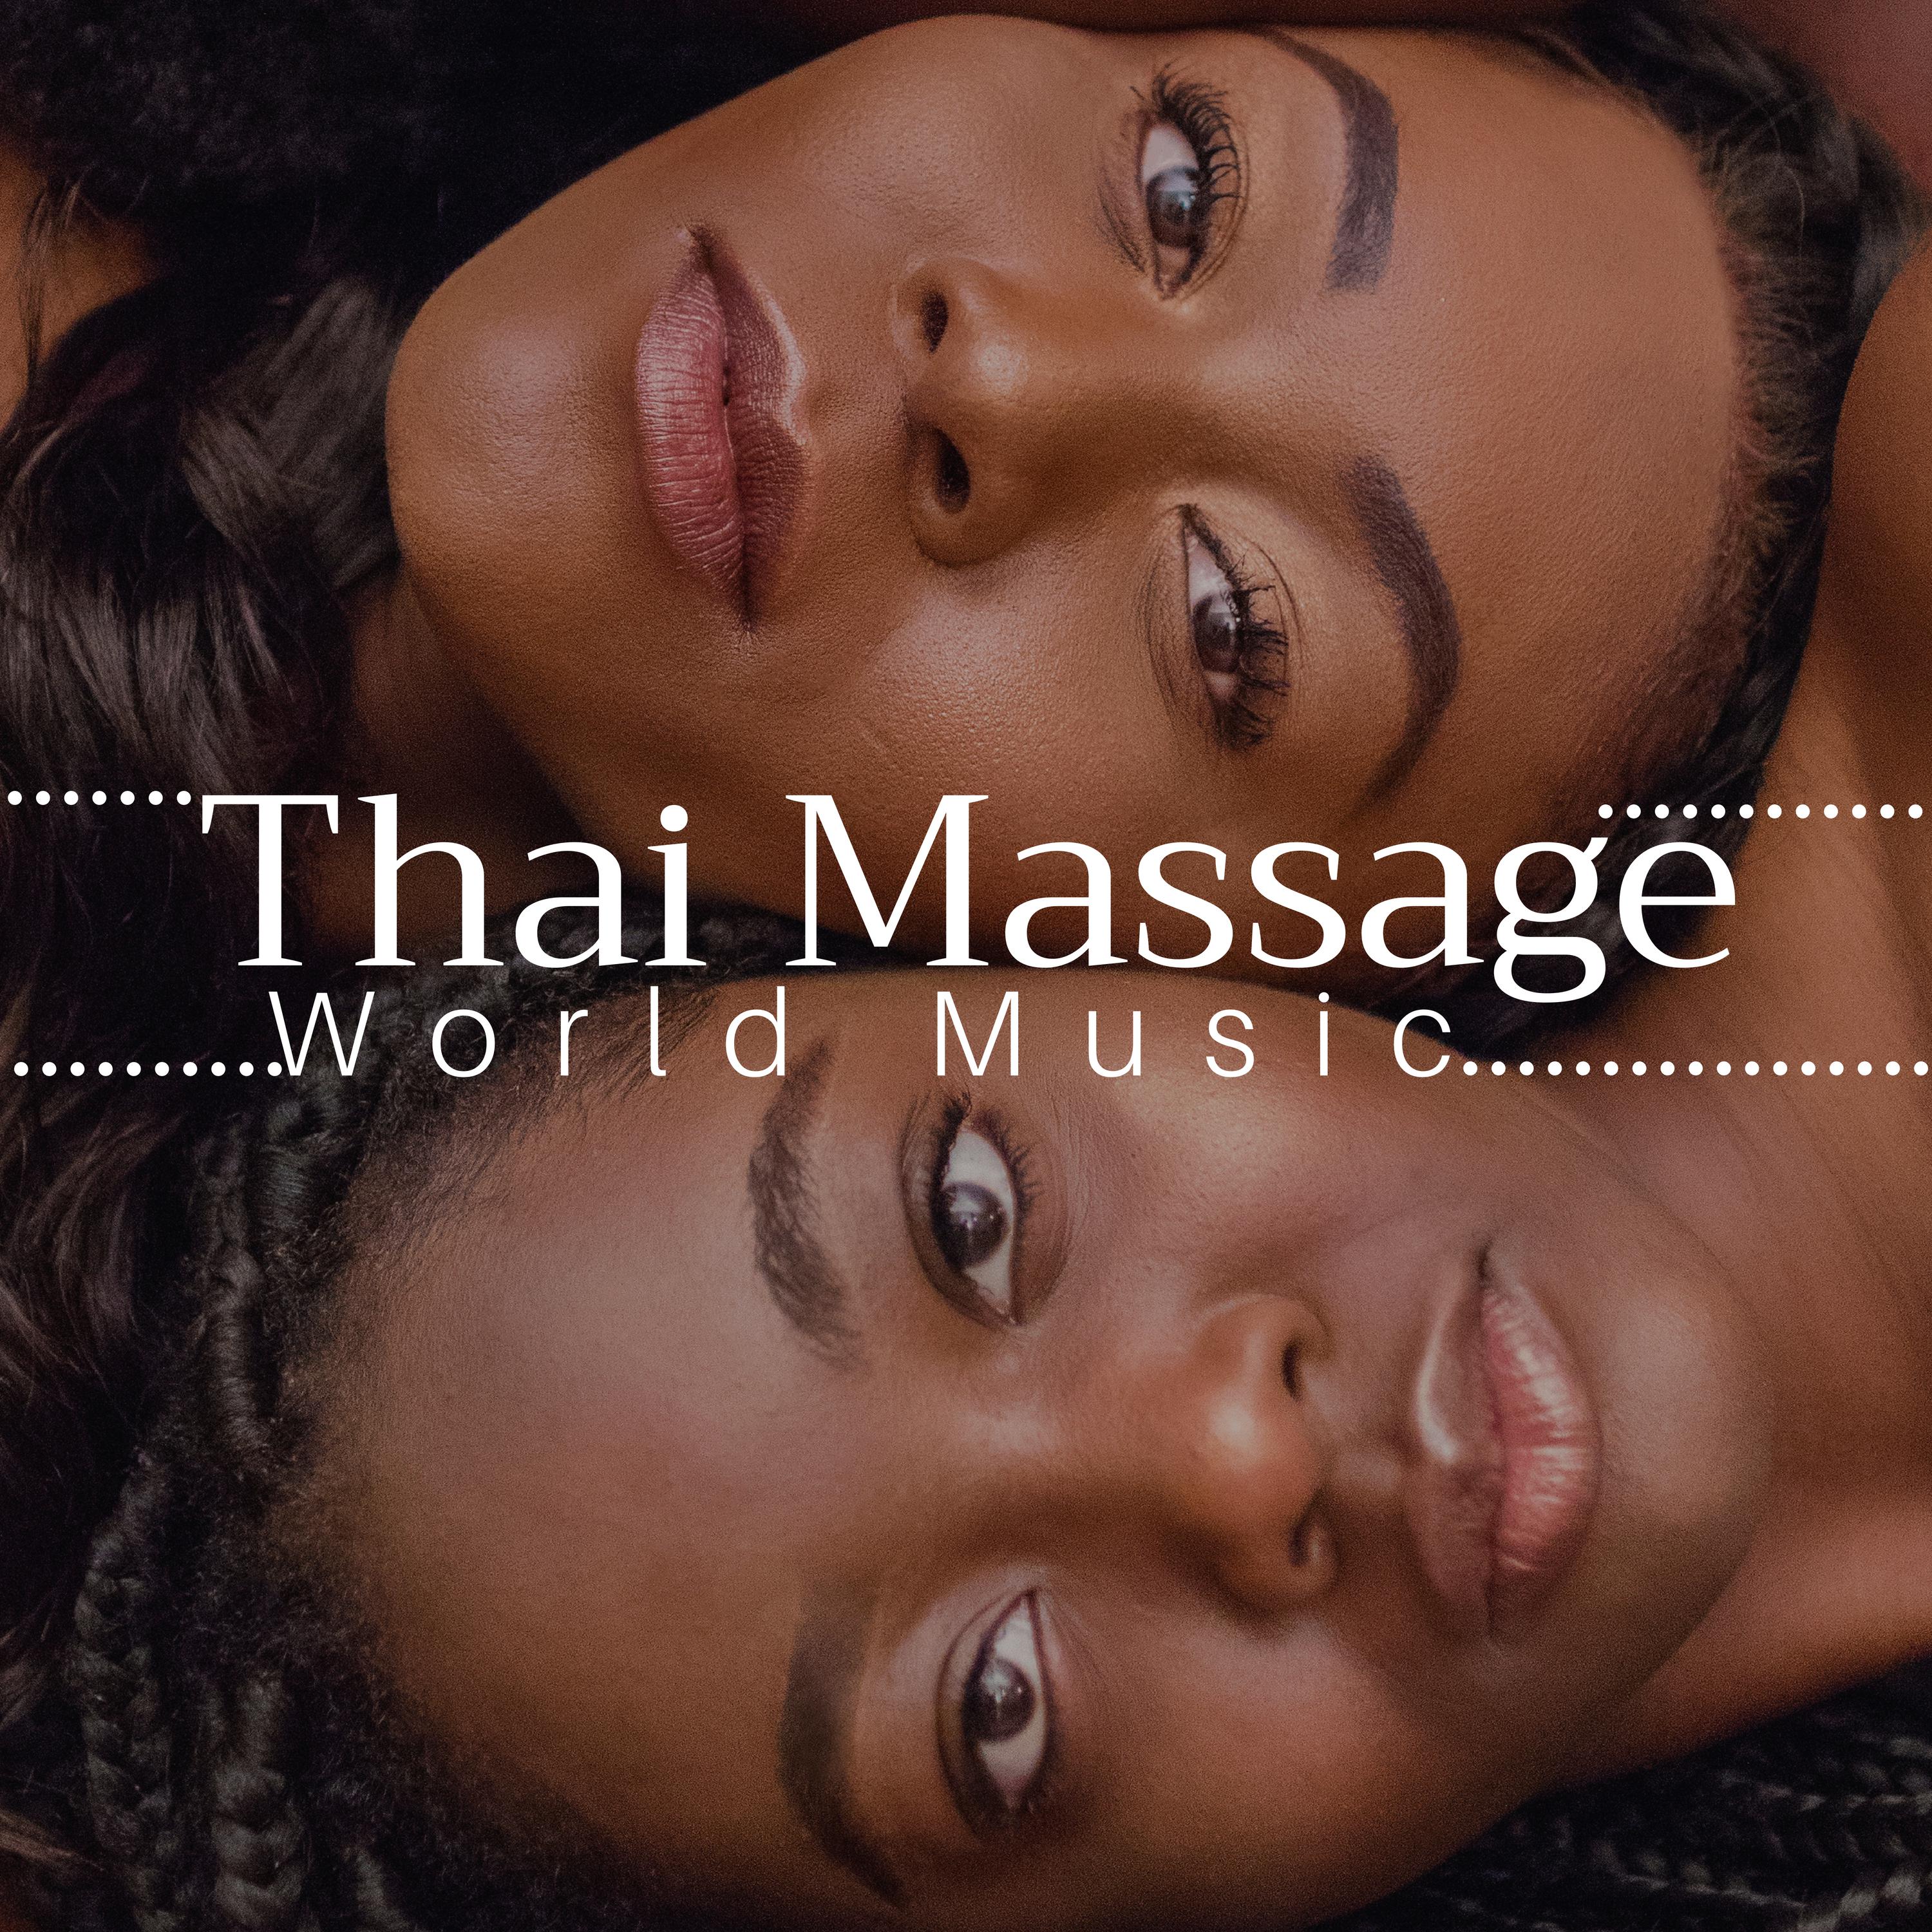 Thai Massage - The Very Best in World Music from Africa, India, China, Japan, Indonesia